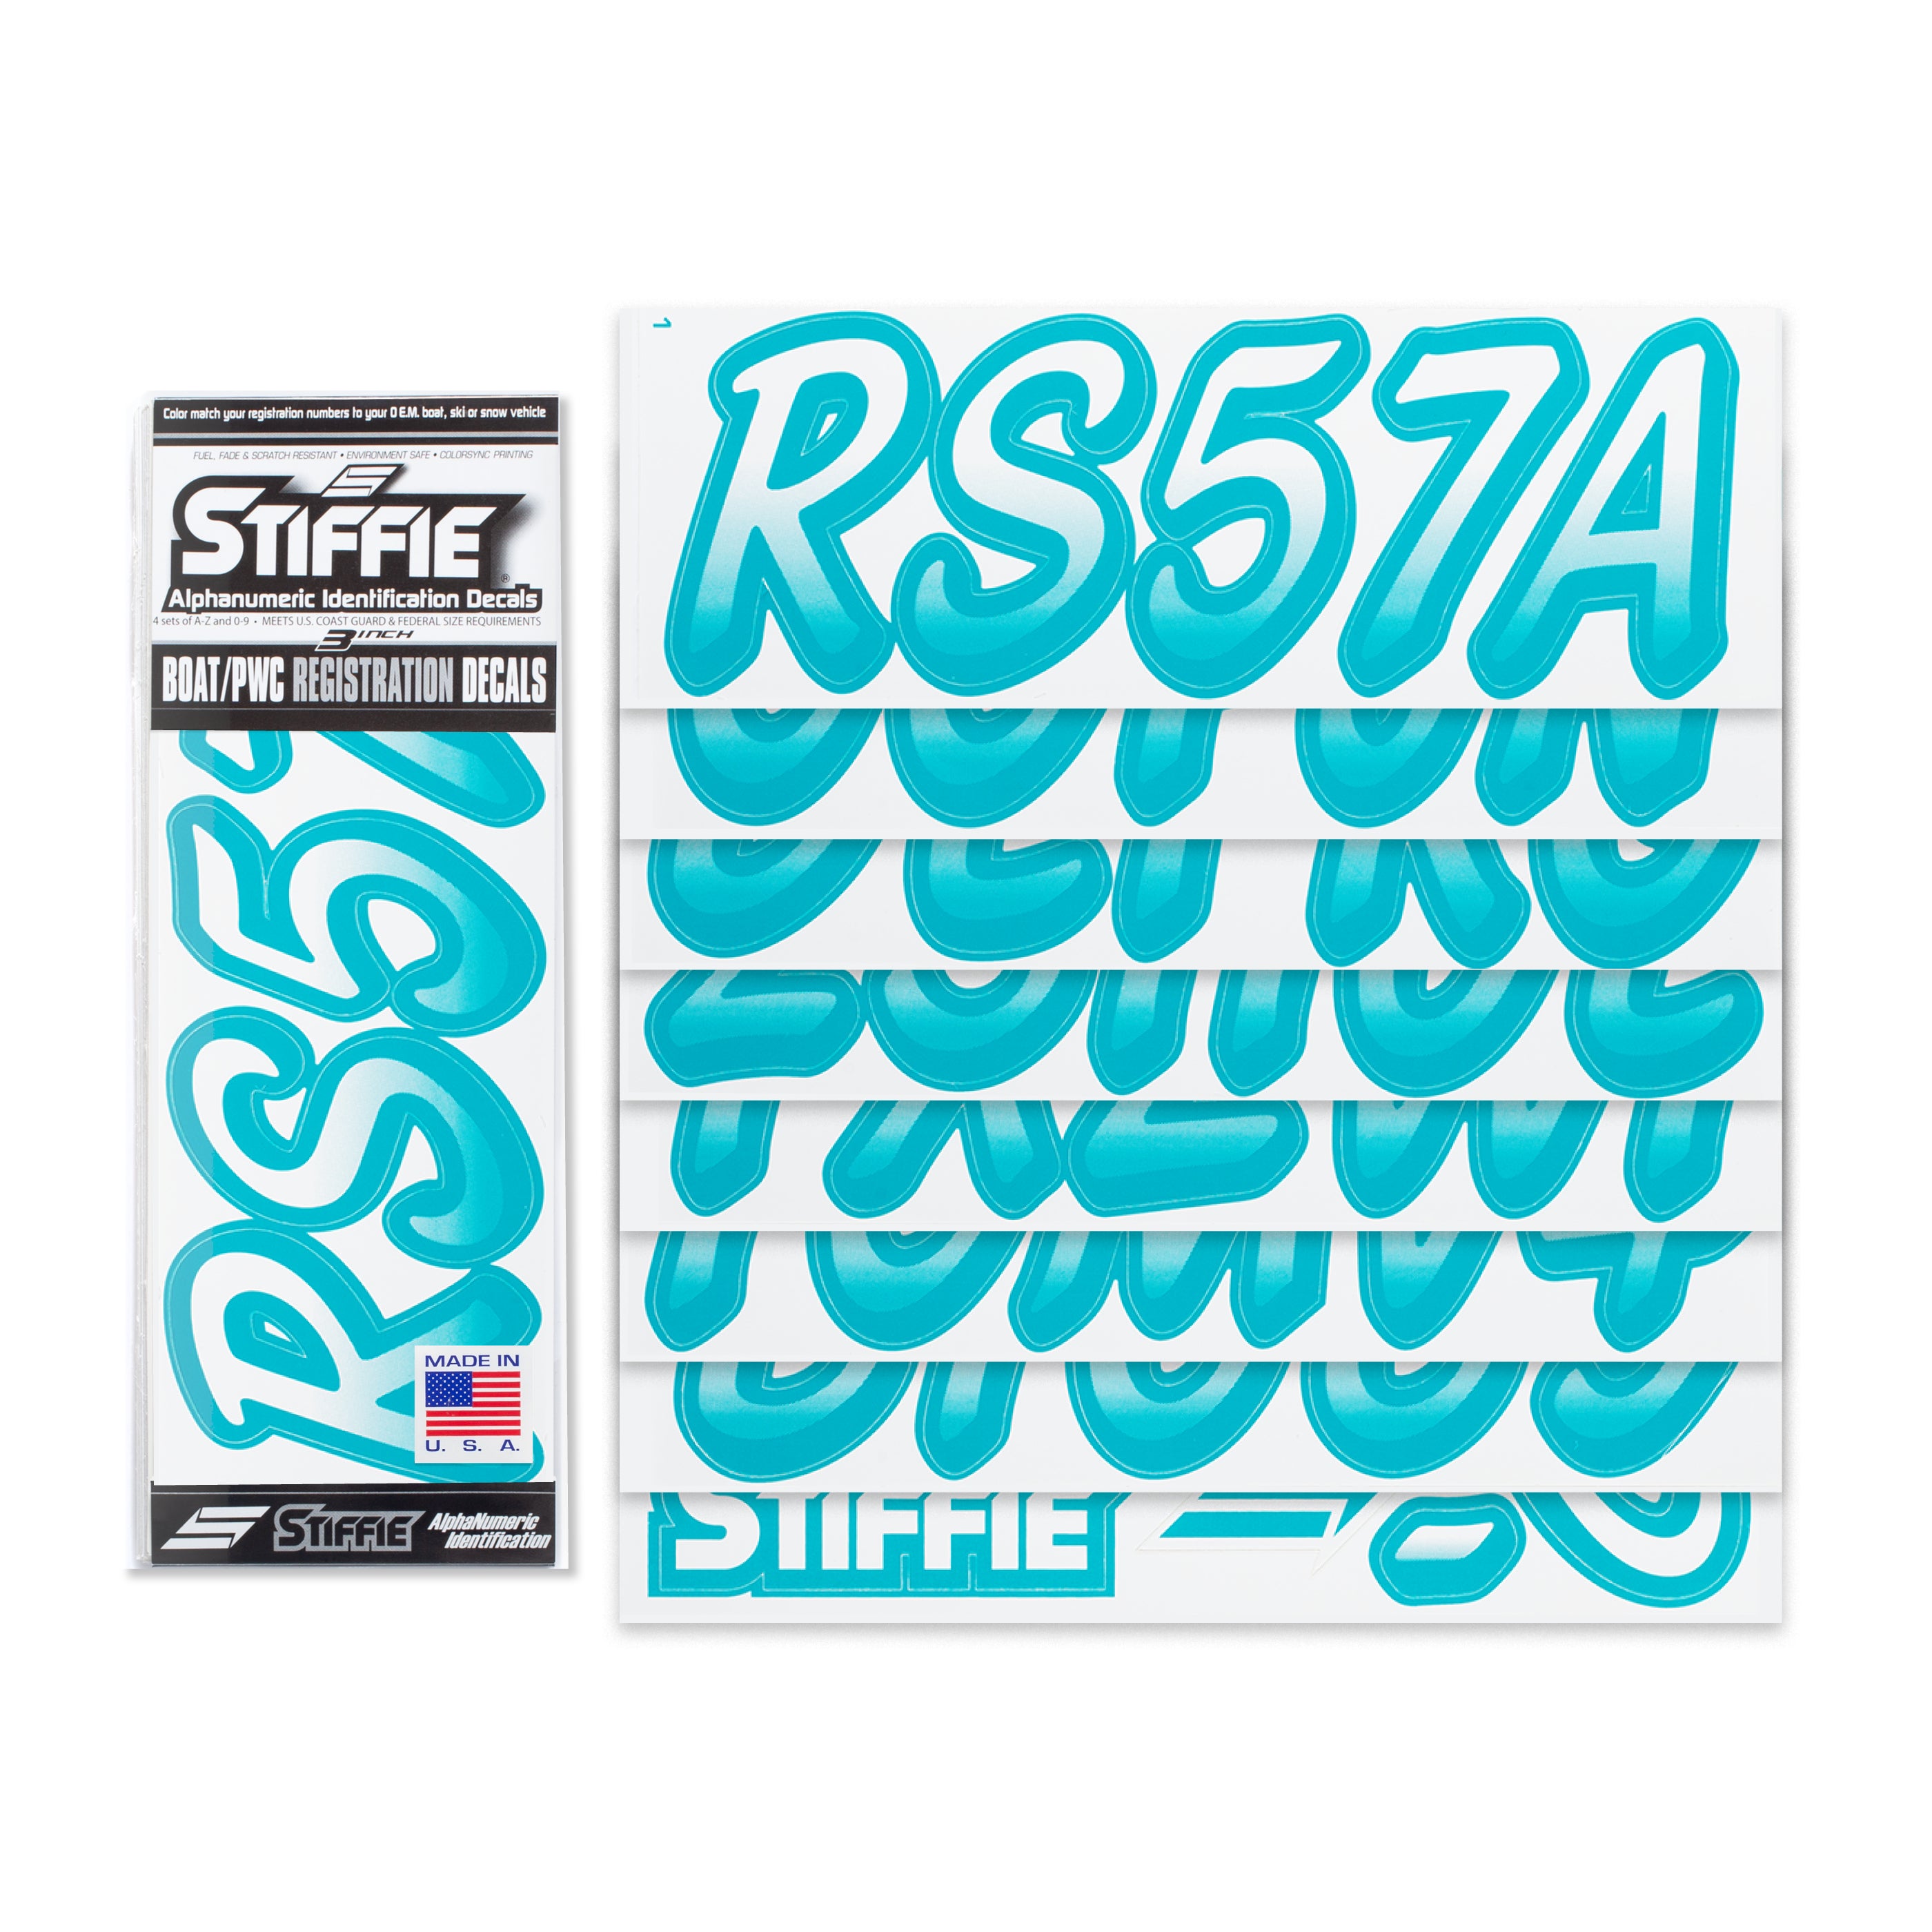 STIFFIE Whipline White / Aqua 3" Alpha-Numeric Registration Identification Numbers Stickers Decals for Boats & Personal Watercraft